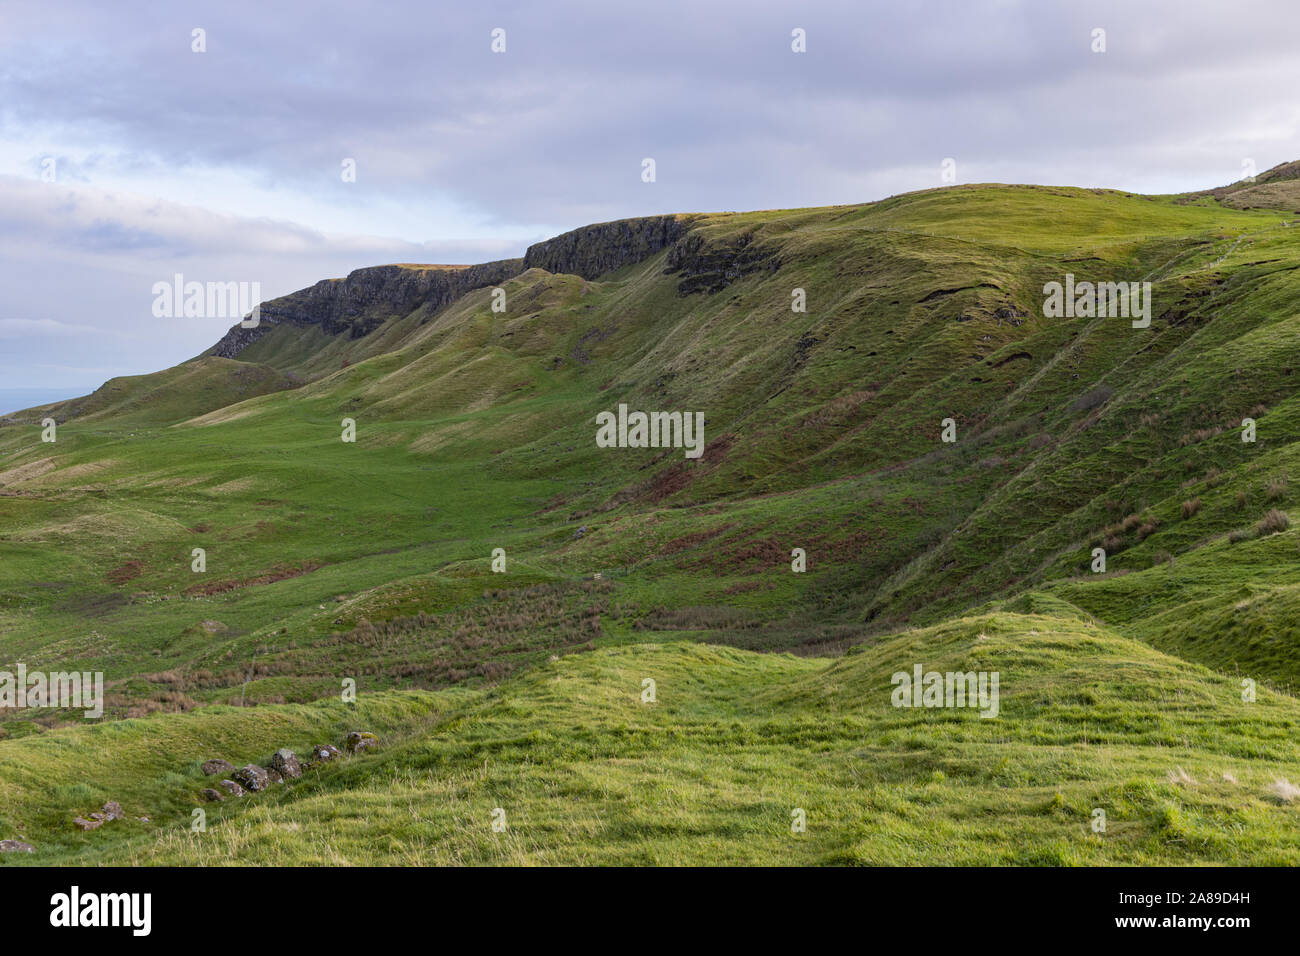 Sallagh Braes County Antrim, Northern Ireland, HBO Game of thrones filming location for season 1 episode 1, Antrim hills way, Ulster way. Stock Photo